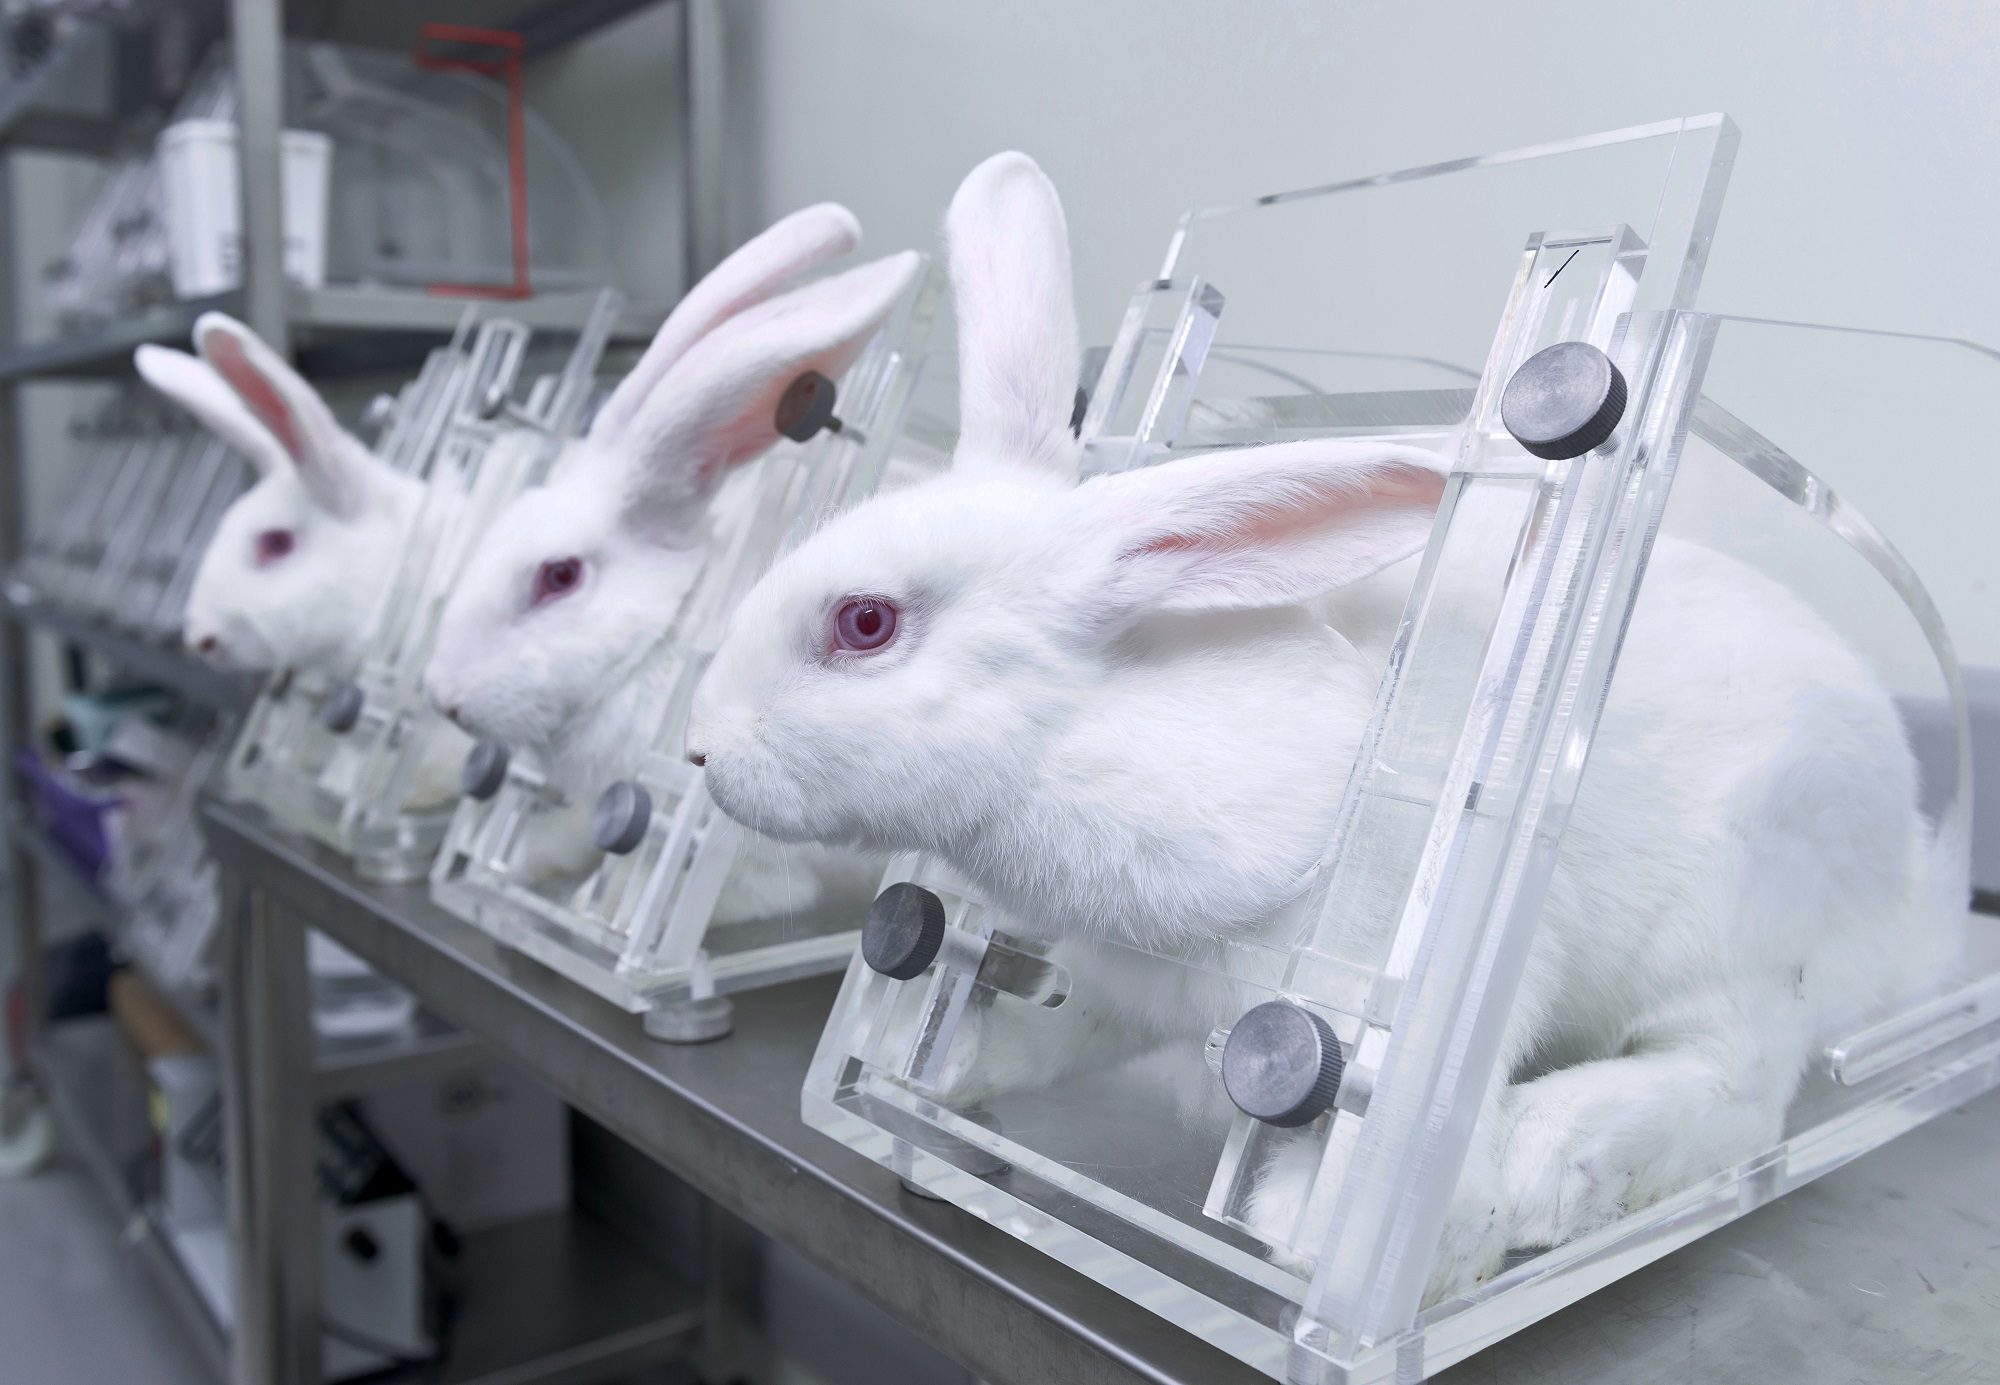 Image shows rabbits in lab